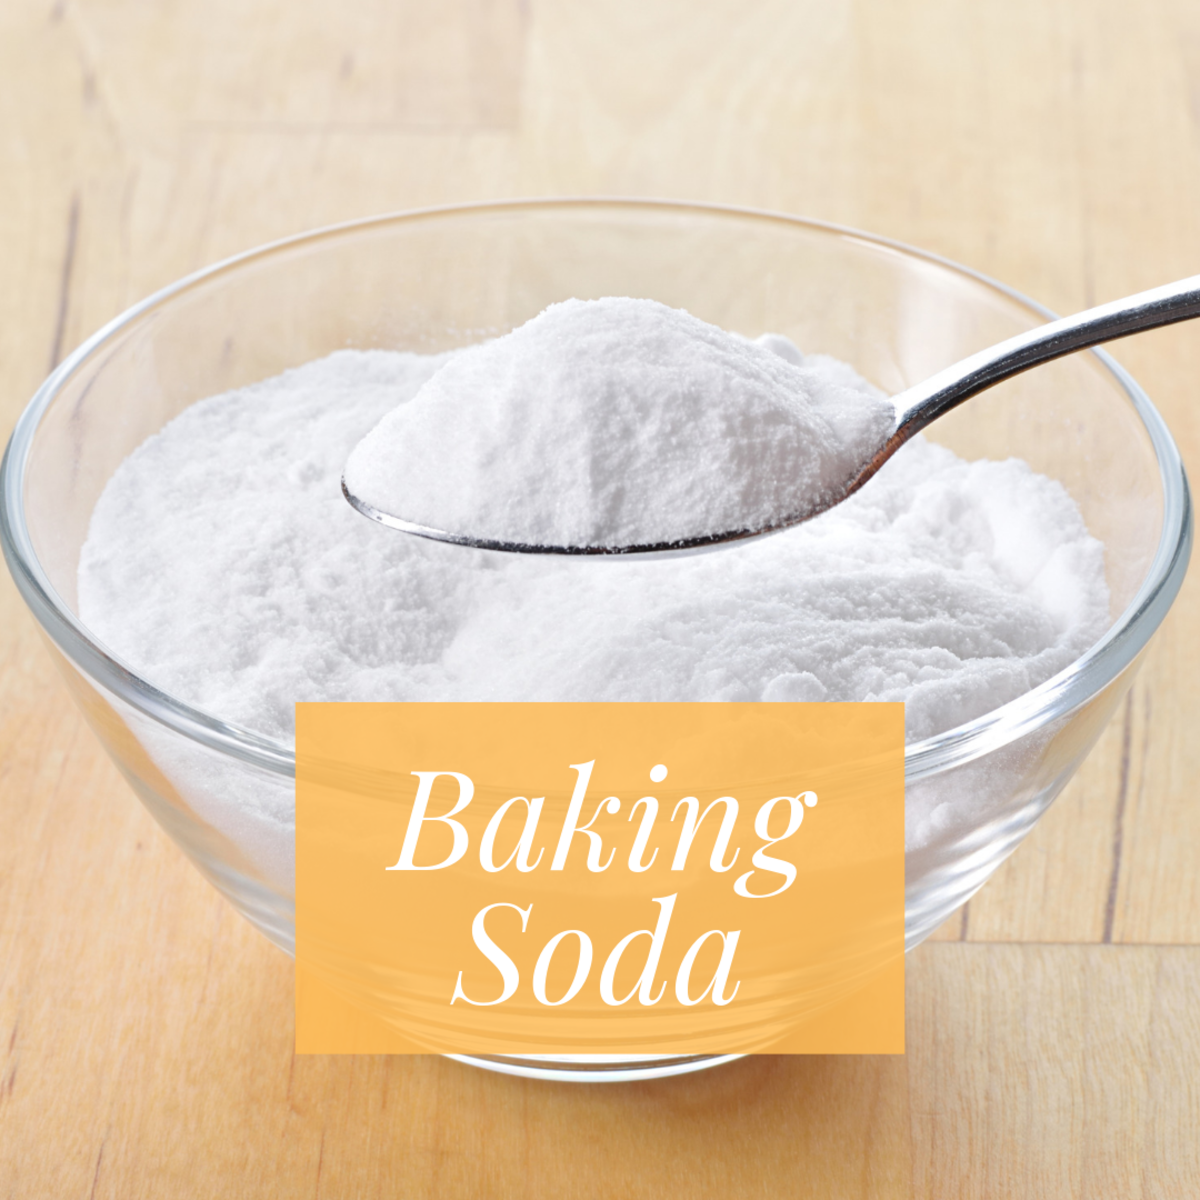 Baking soda can be used as a gentle, oil-removing face scrub and cleanser.